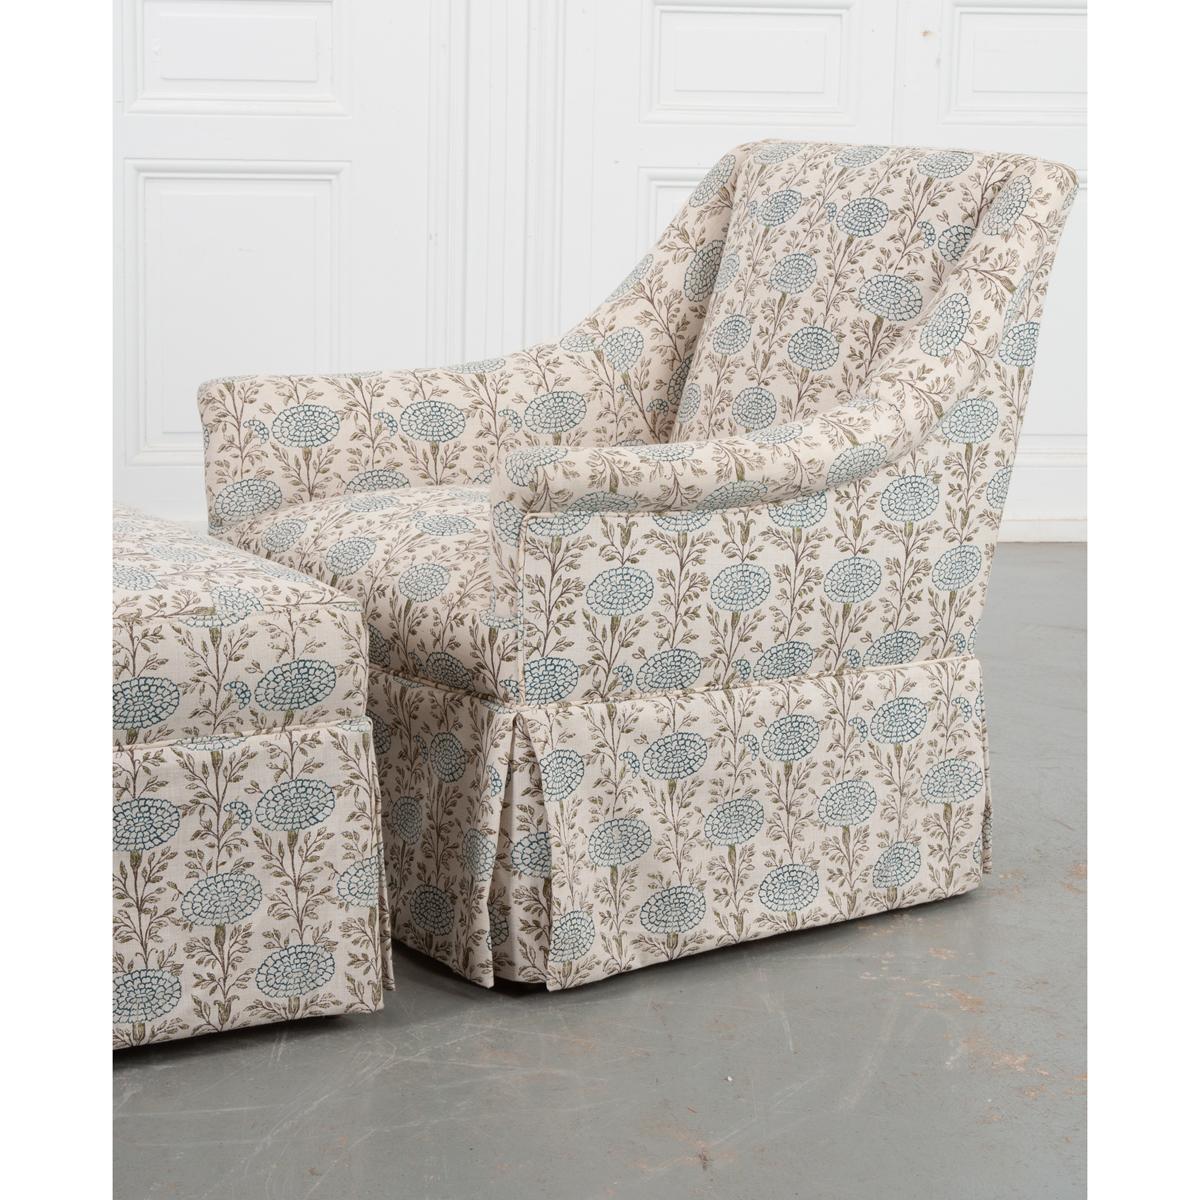 A charming armchair and ottoman duo in matching Lisa Fine fabric. Custom made by Cisco, this petite set provides a comfortable and stylish place to relax without taking up too much space. The repeating blue flower pattern and cream base of the